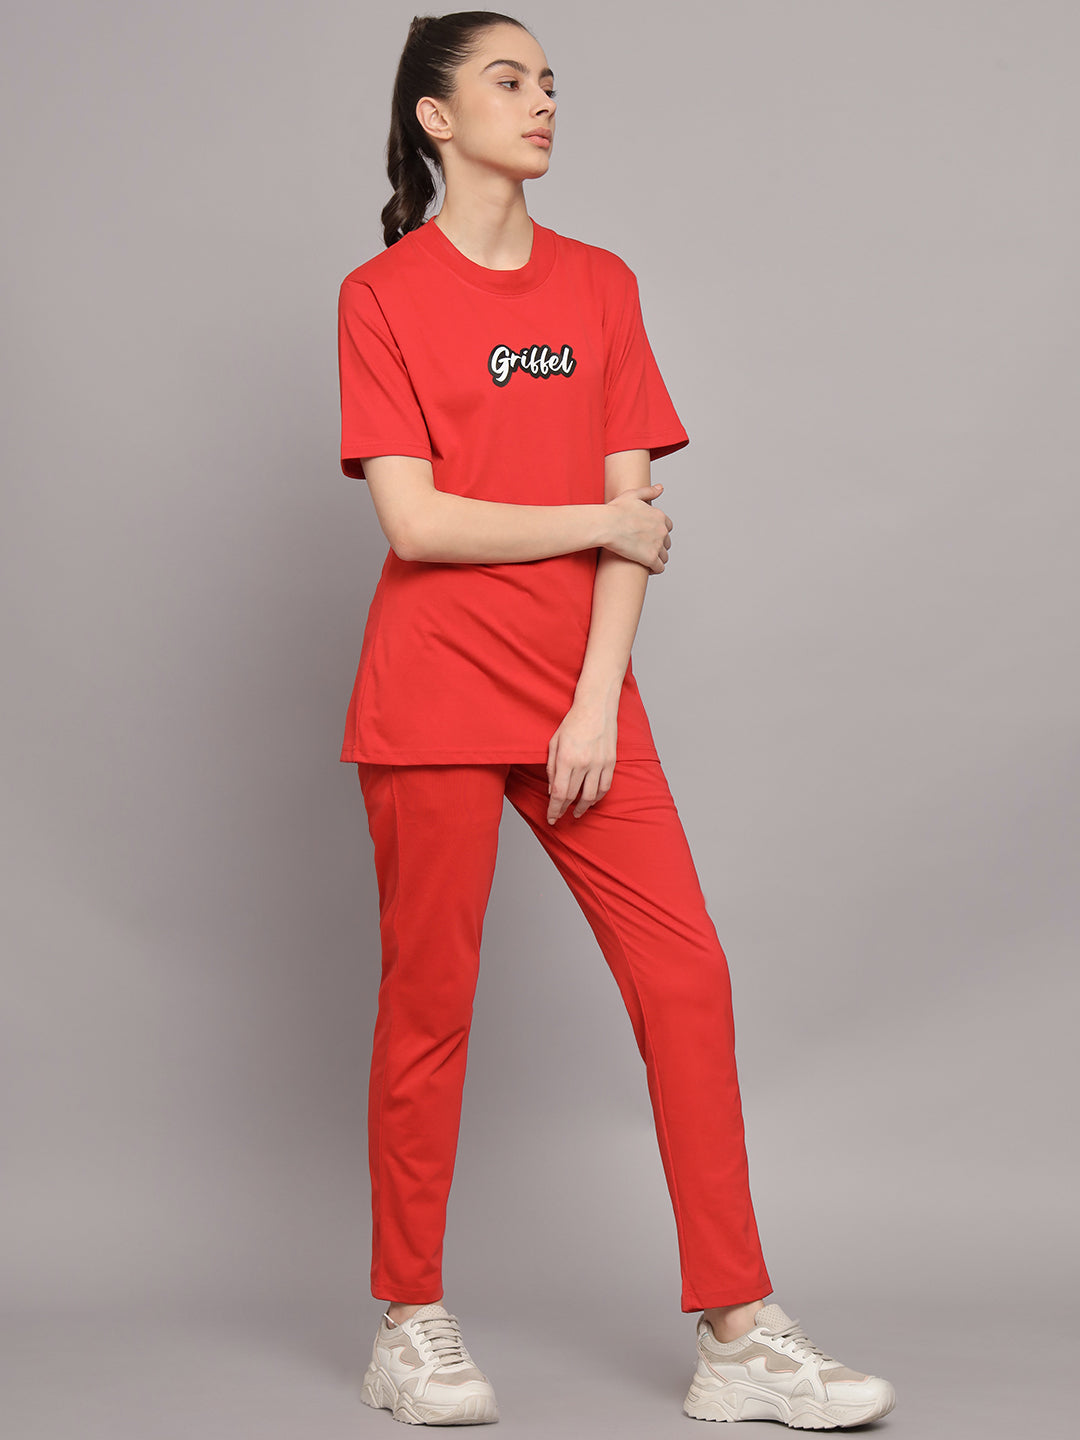 GRIFFEL Women Printed Oversized Loose fit Red T-shirt and Trackpant Set - griffel